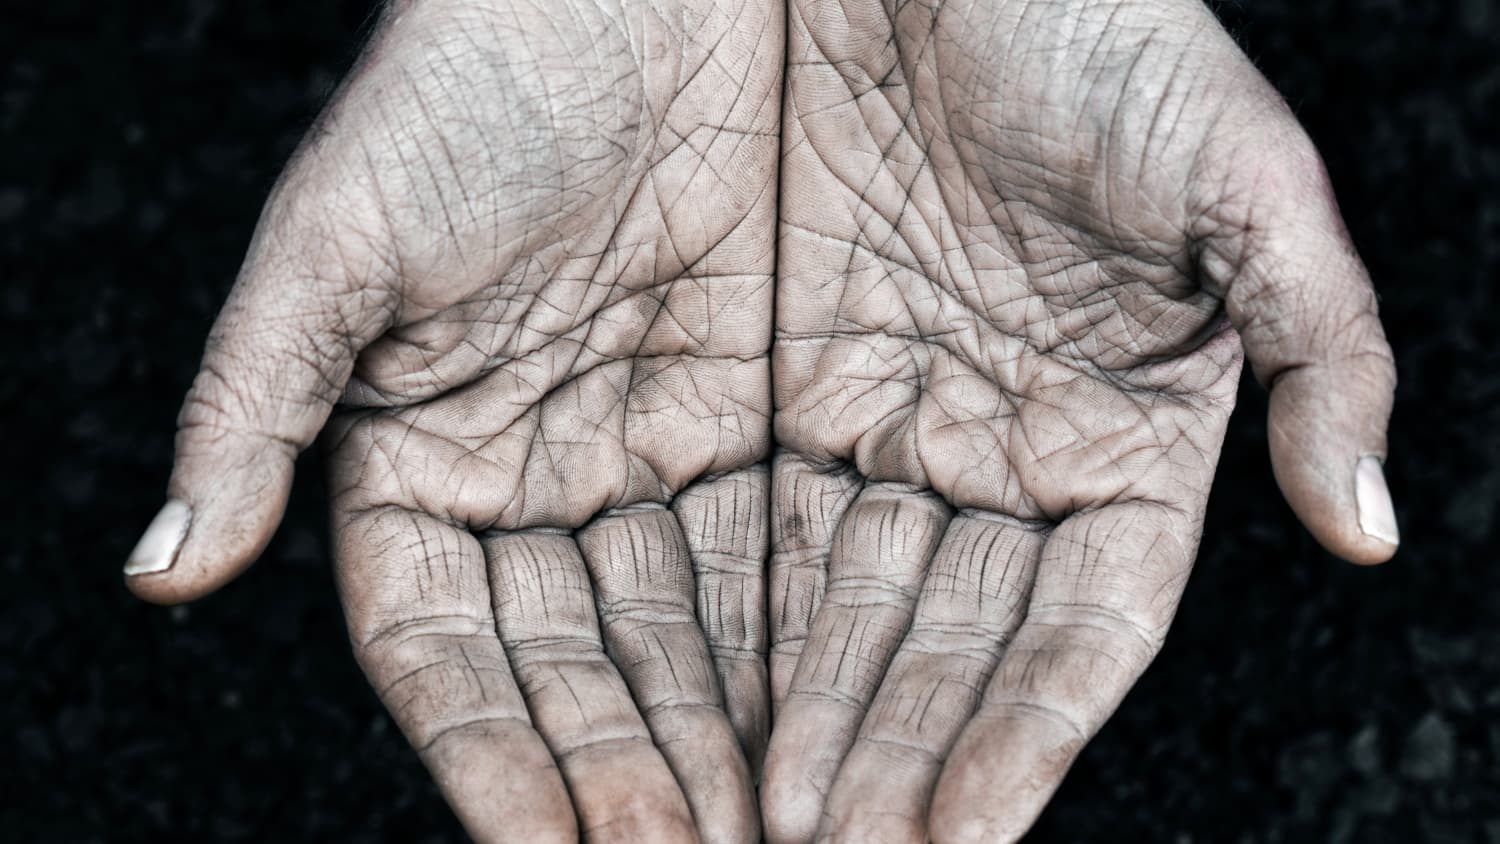 close-up of person's hands, possibly indicating hand ischemia